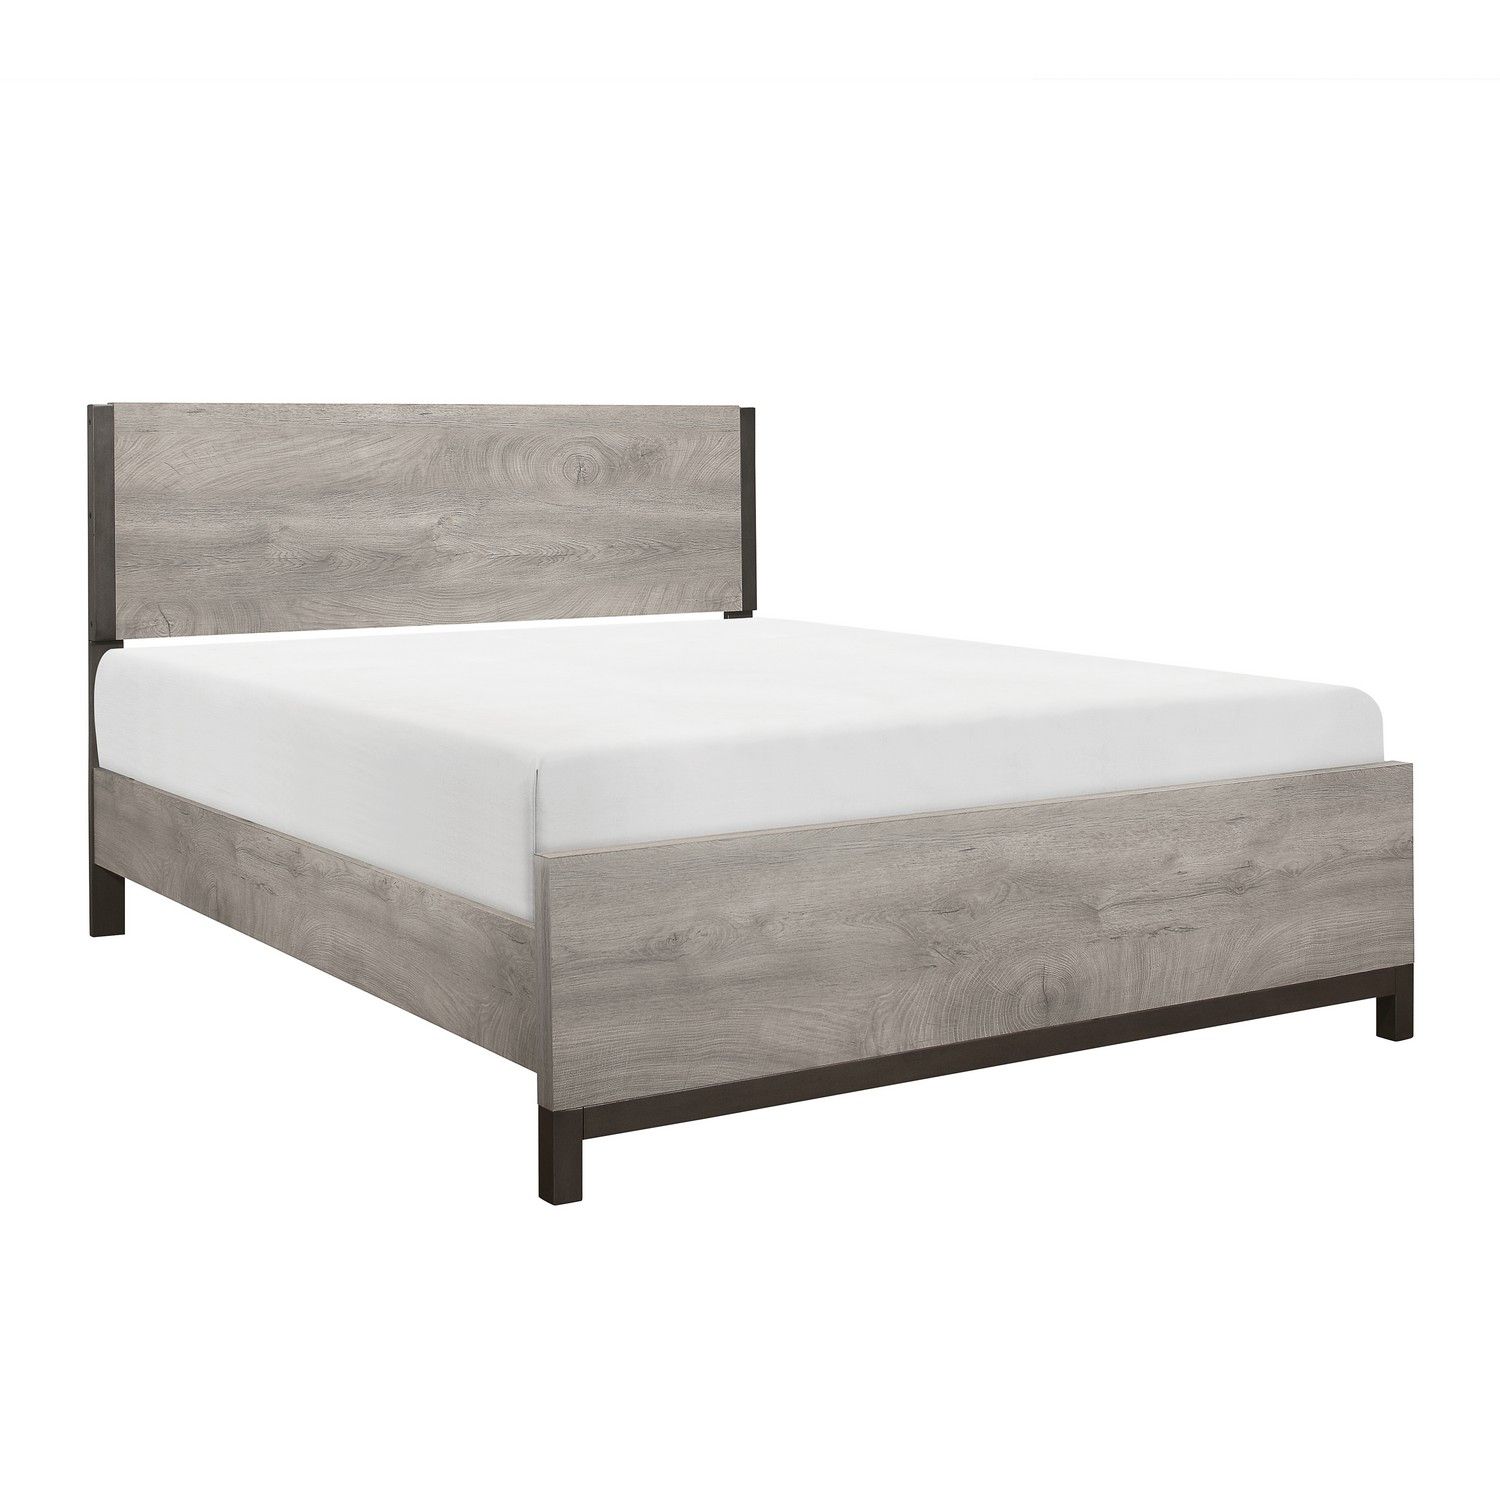 Homelegance Zephyr Bed - Two-tone : Light Gray And Gray